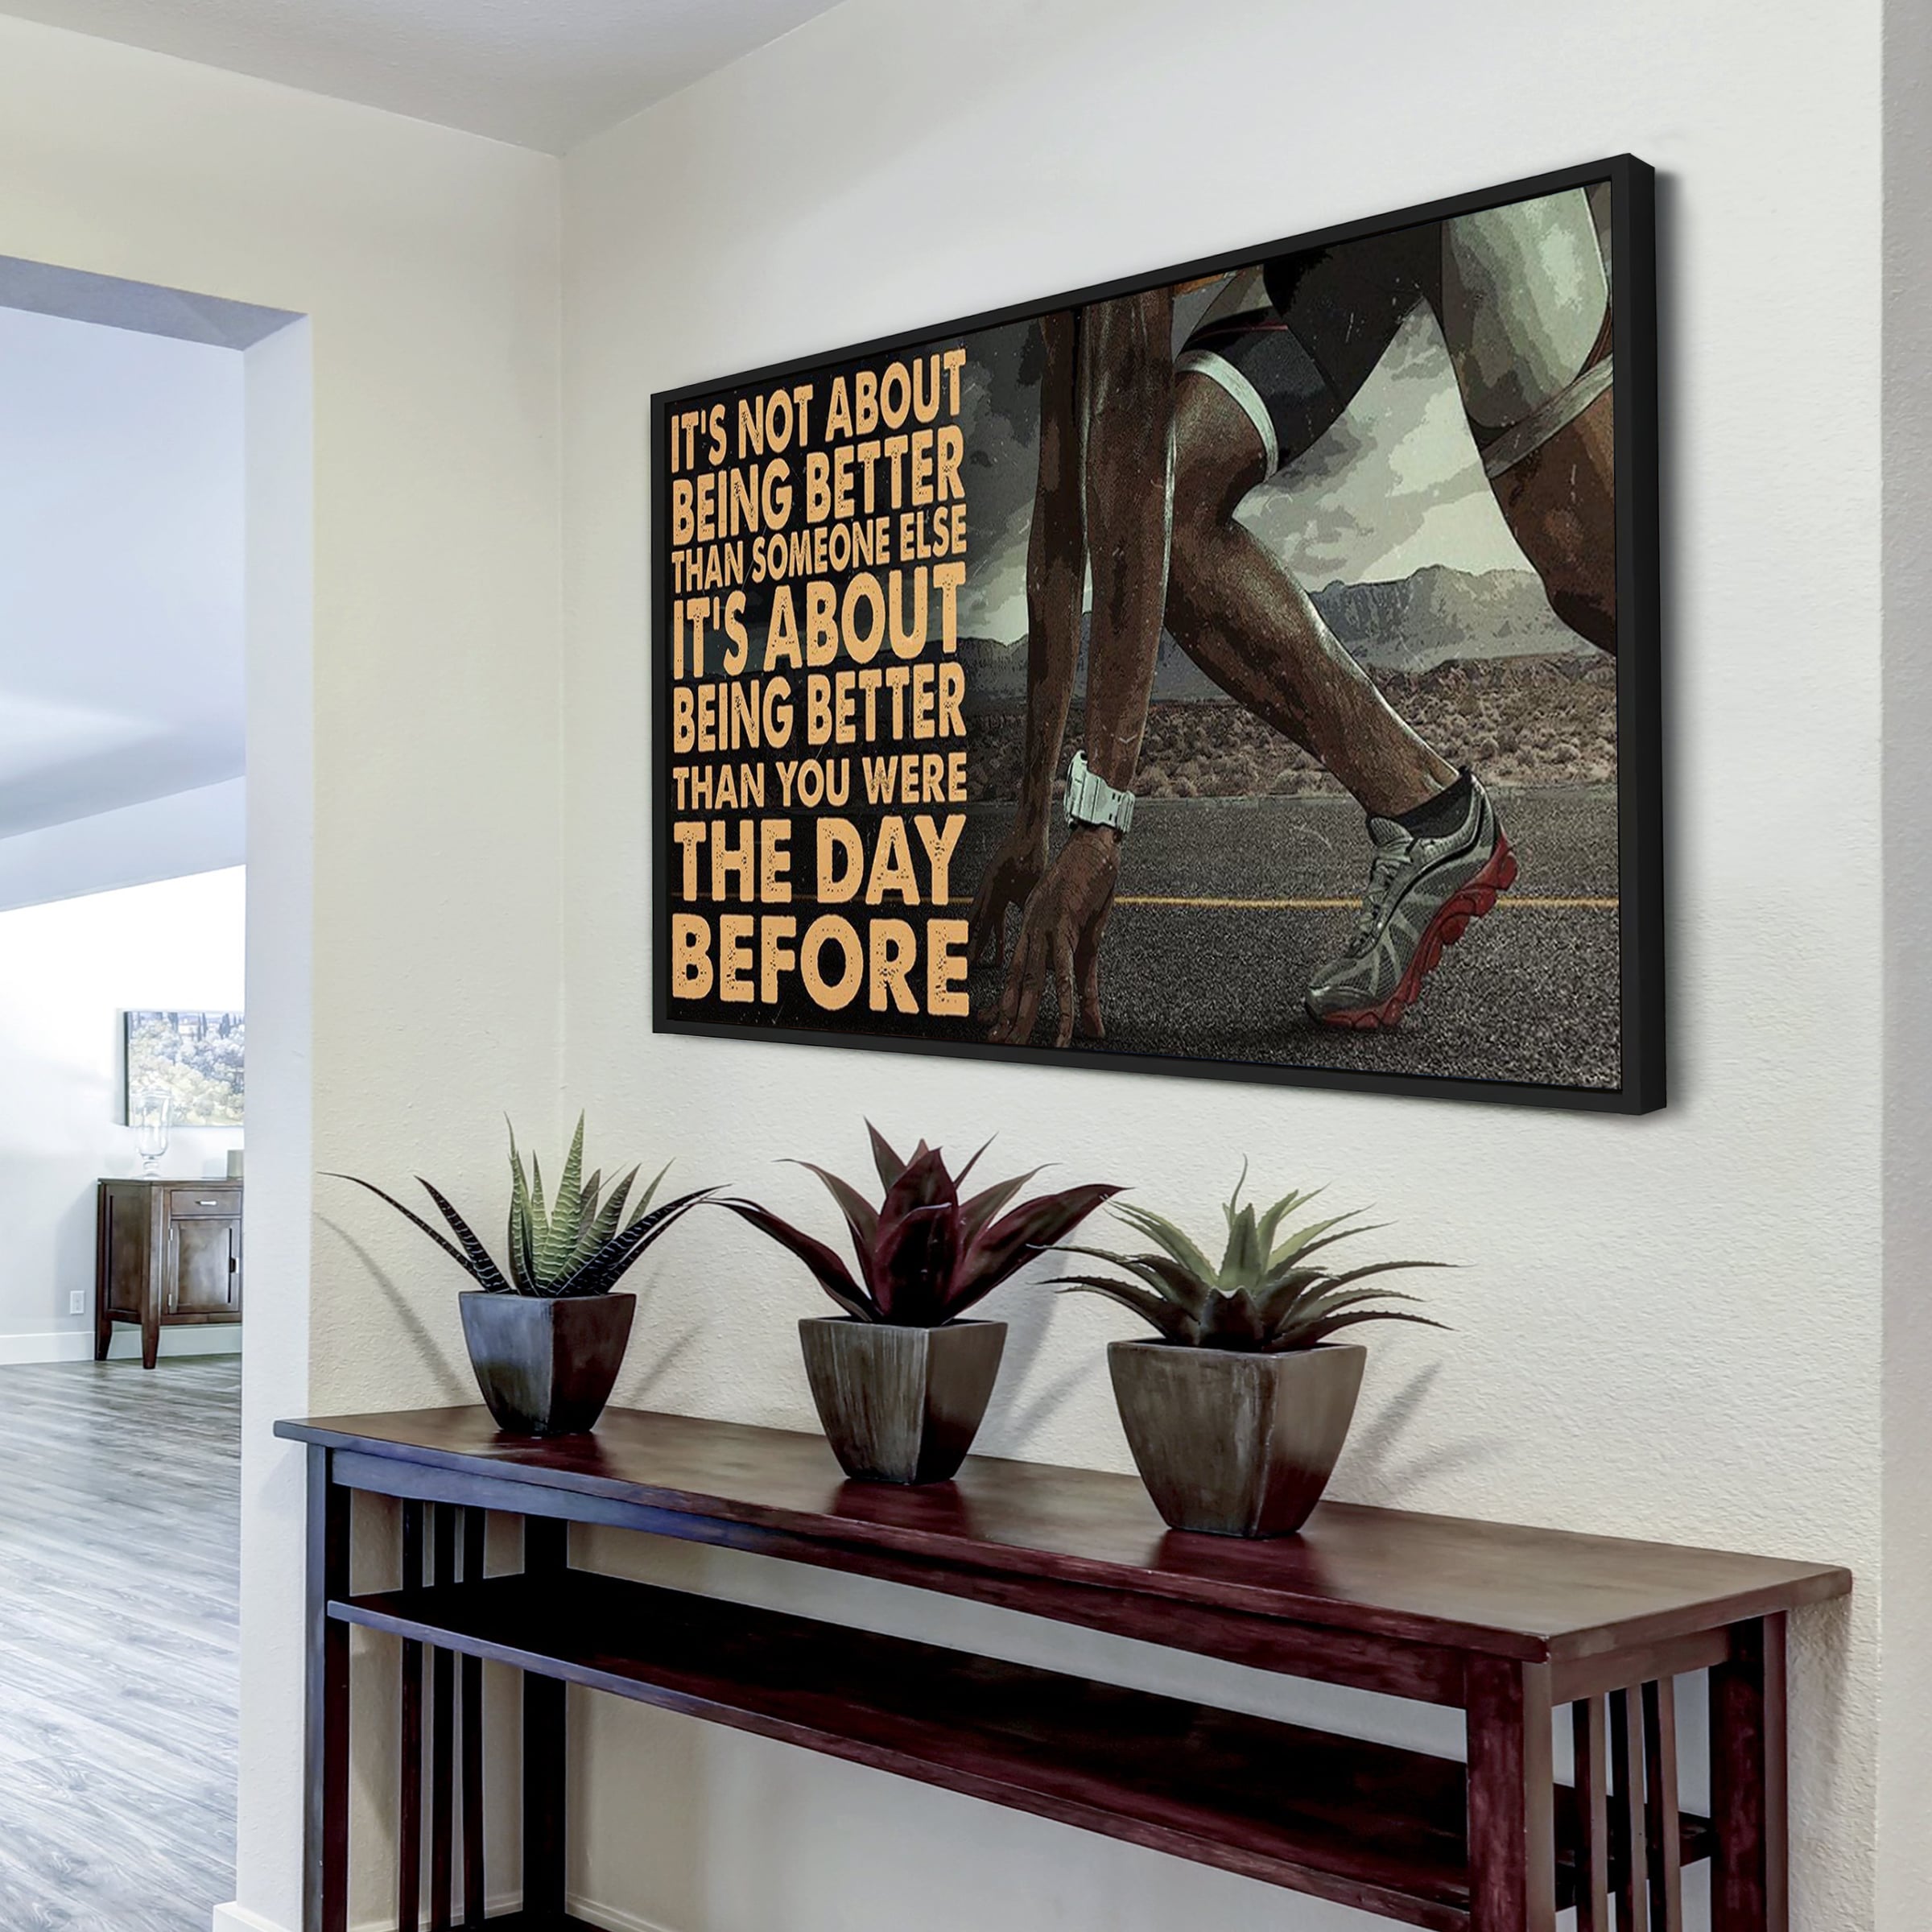 Baseball customizable poster canvas - It is not about better than someone else, It is about being better than you were the day before